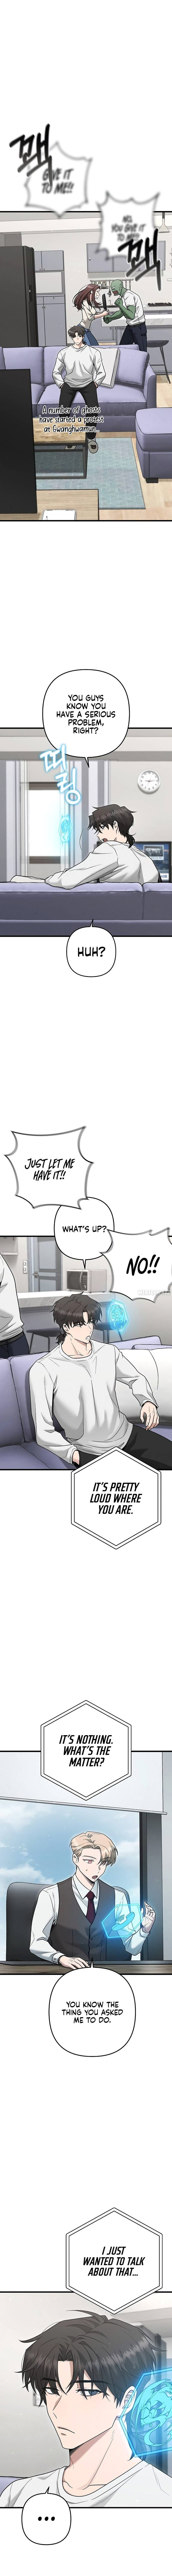 foreigner-on-the-periphery-chap-39-6